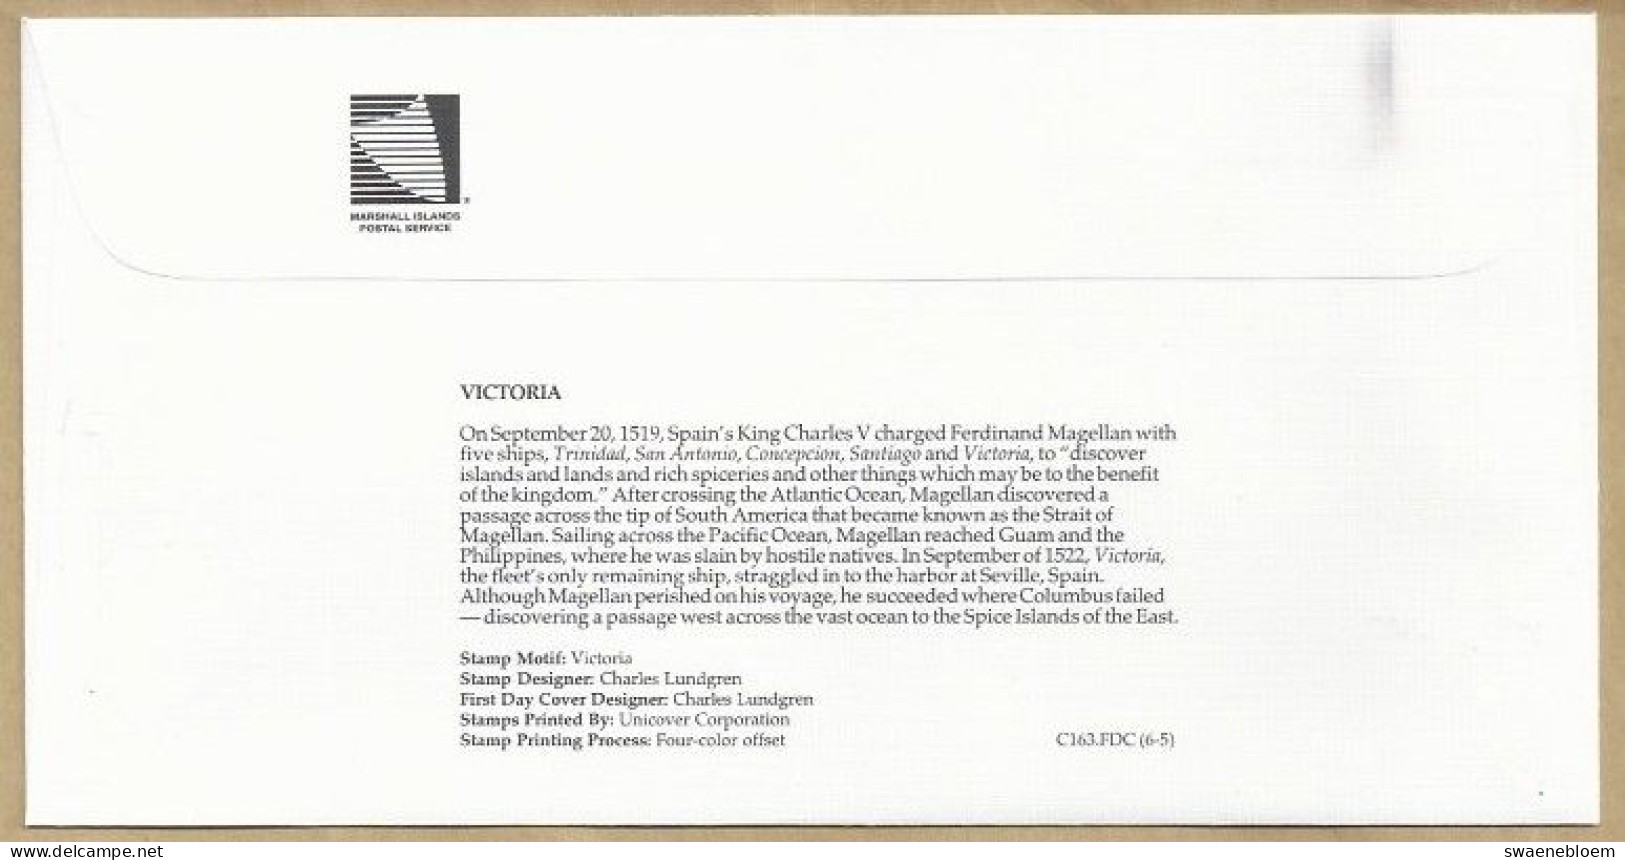 FDC. REPUBLIC OF THE MARSHALL ISLANDS. JUL 20 2000 MAJURO. VICTORIA. SHIPS OF DISCOVERY. C163.FDC. (6-5) - Marshallinseln